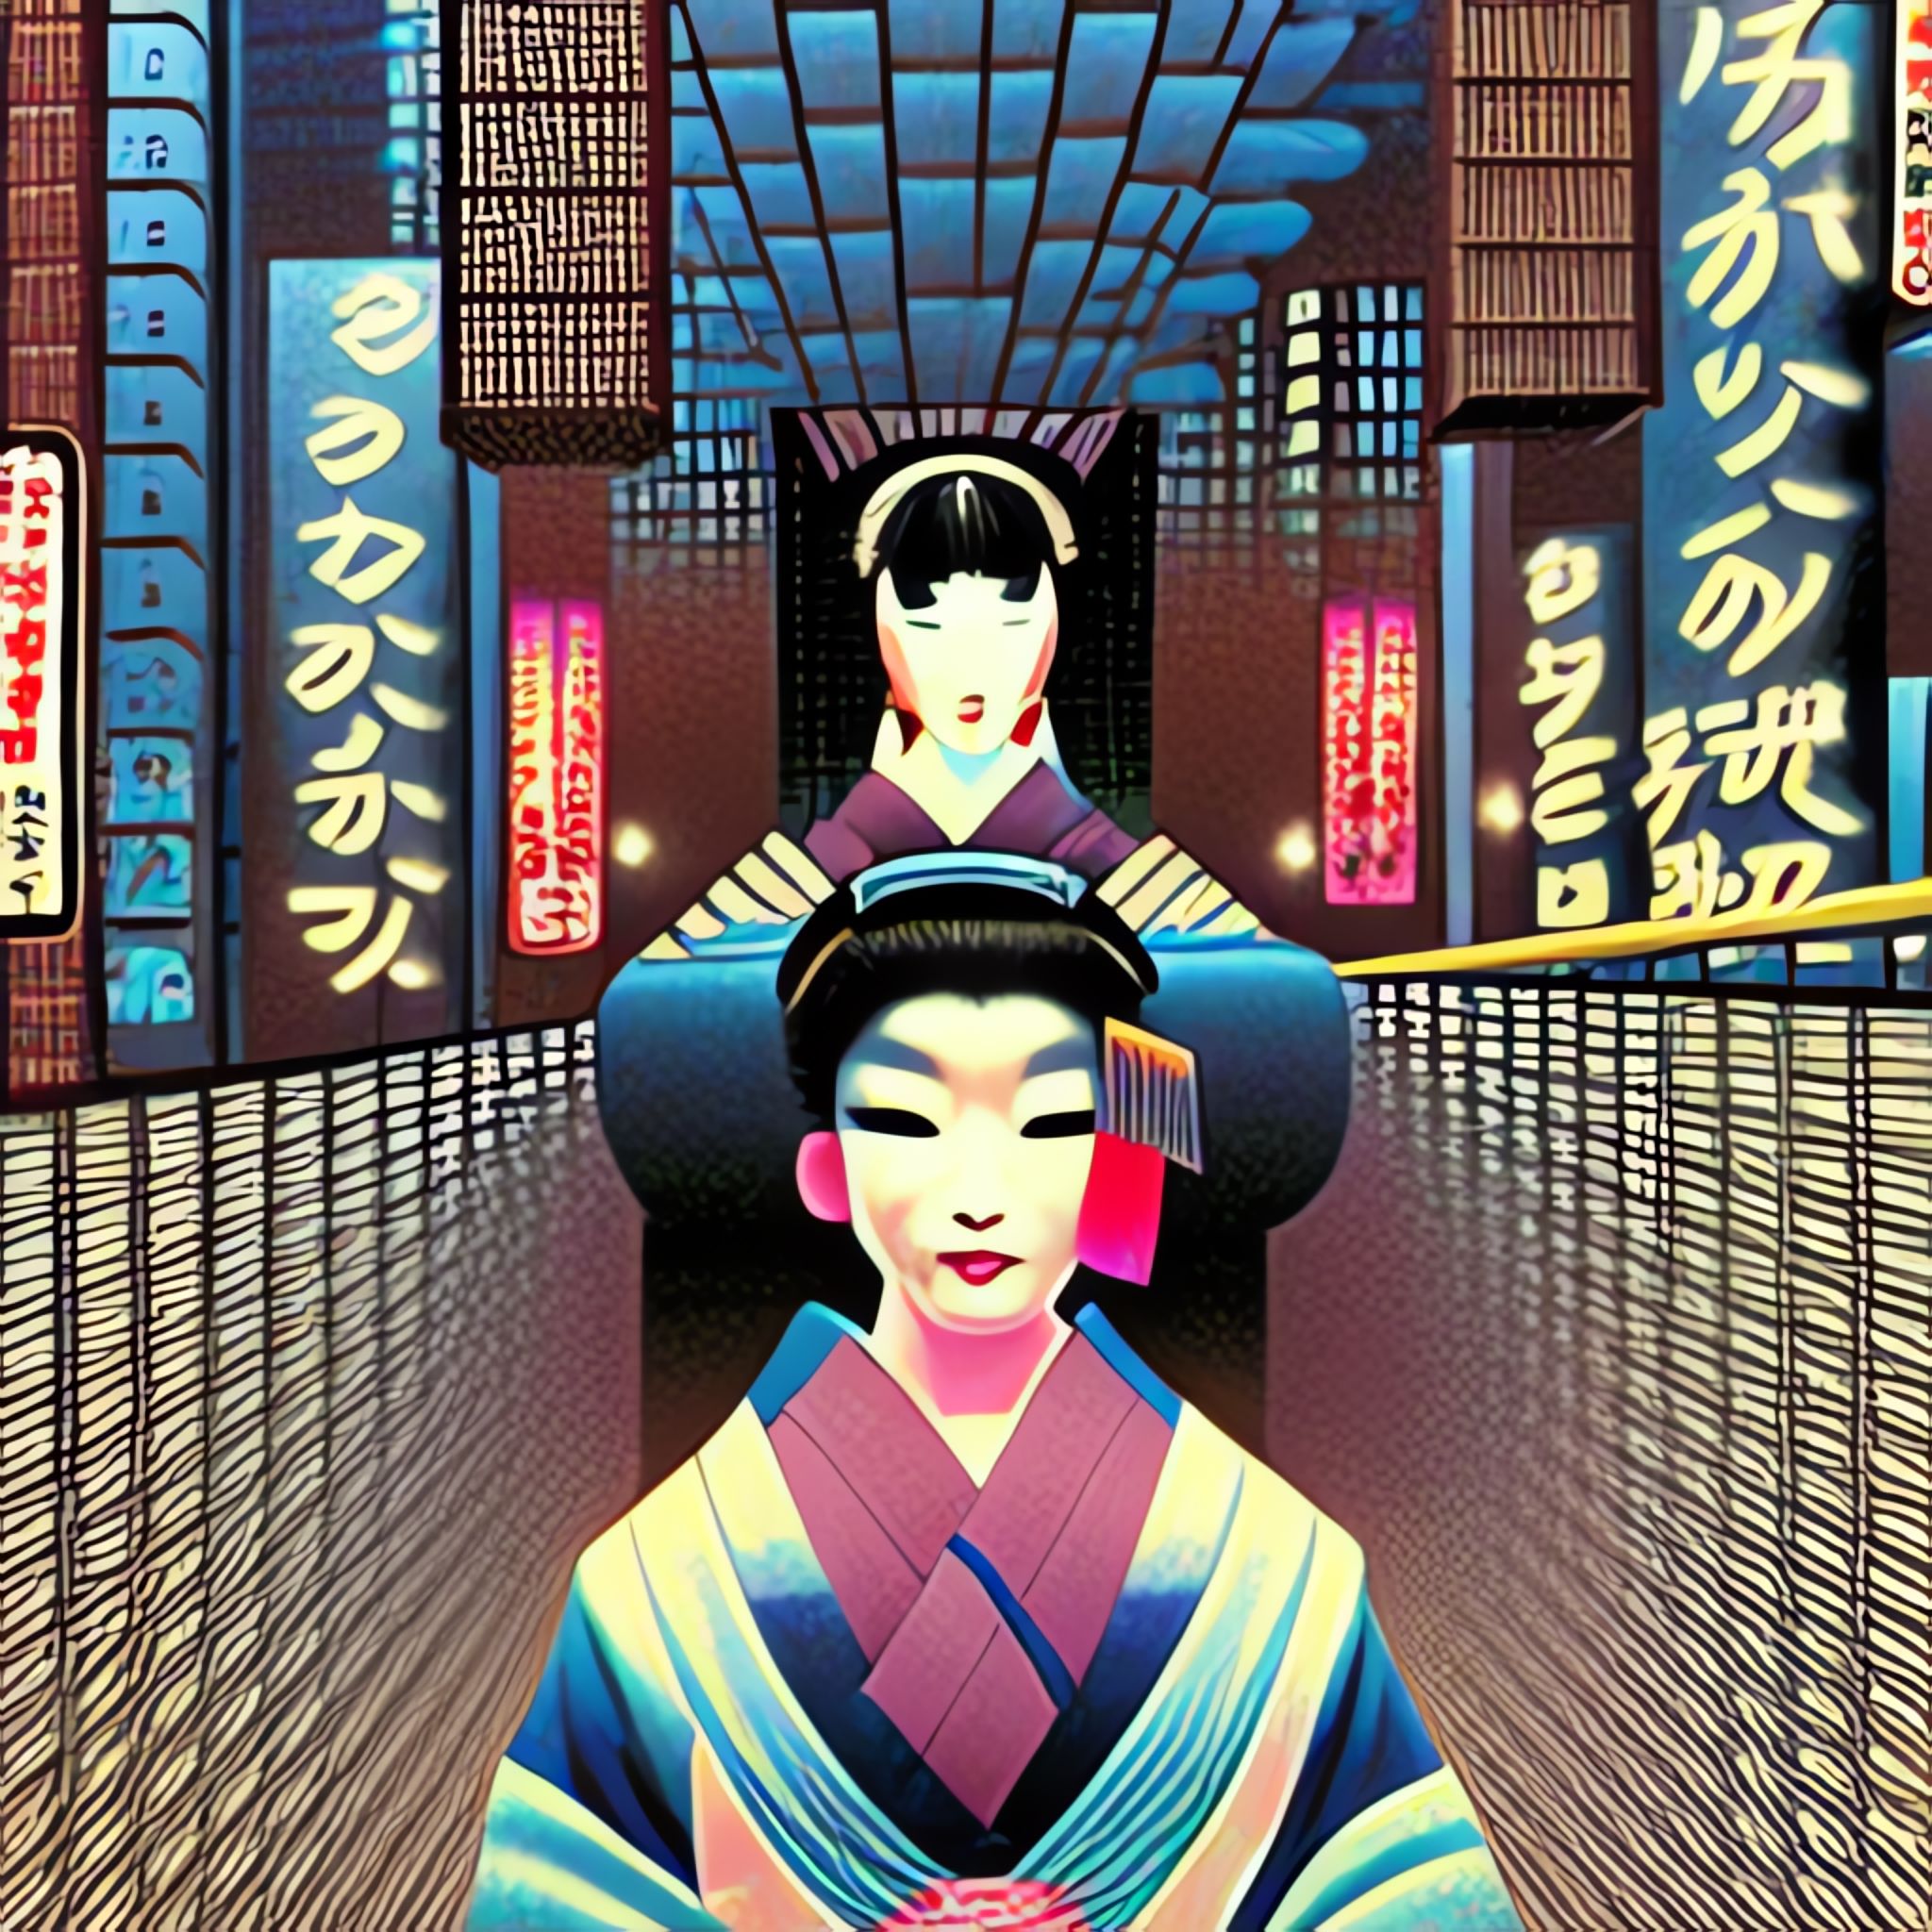 Geisha-in-the-middle-of-the-frame-Neo-Tokyo-lots-of-details-Shusei-Nagaoko-ss5v